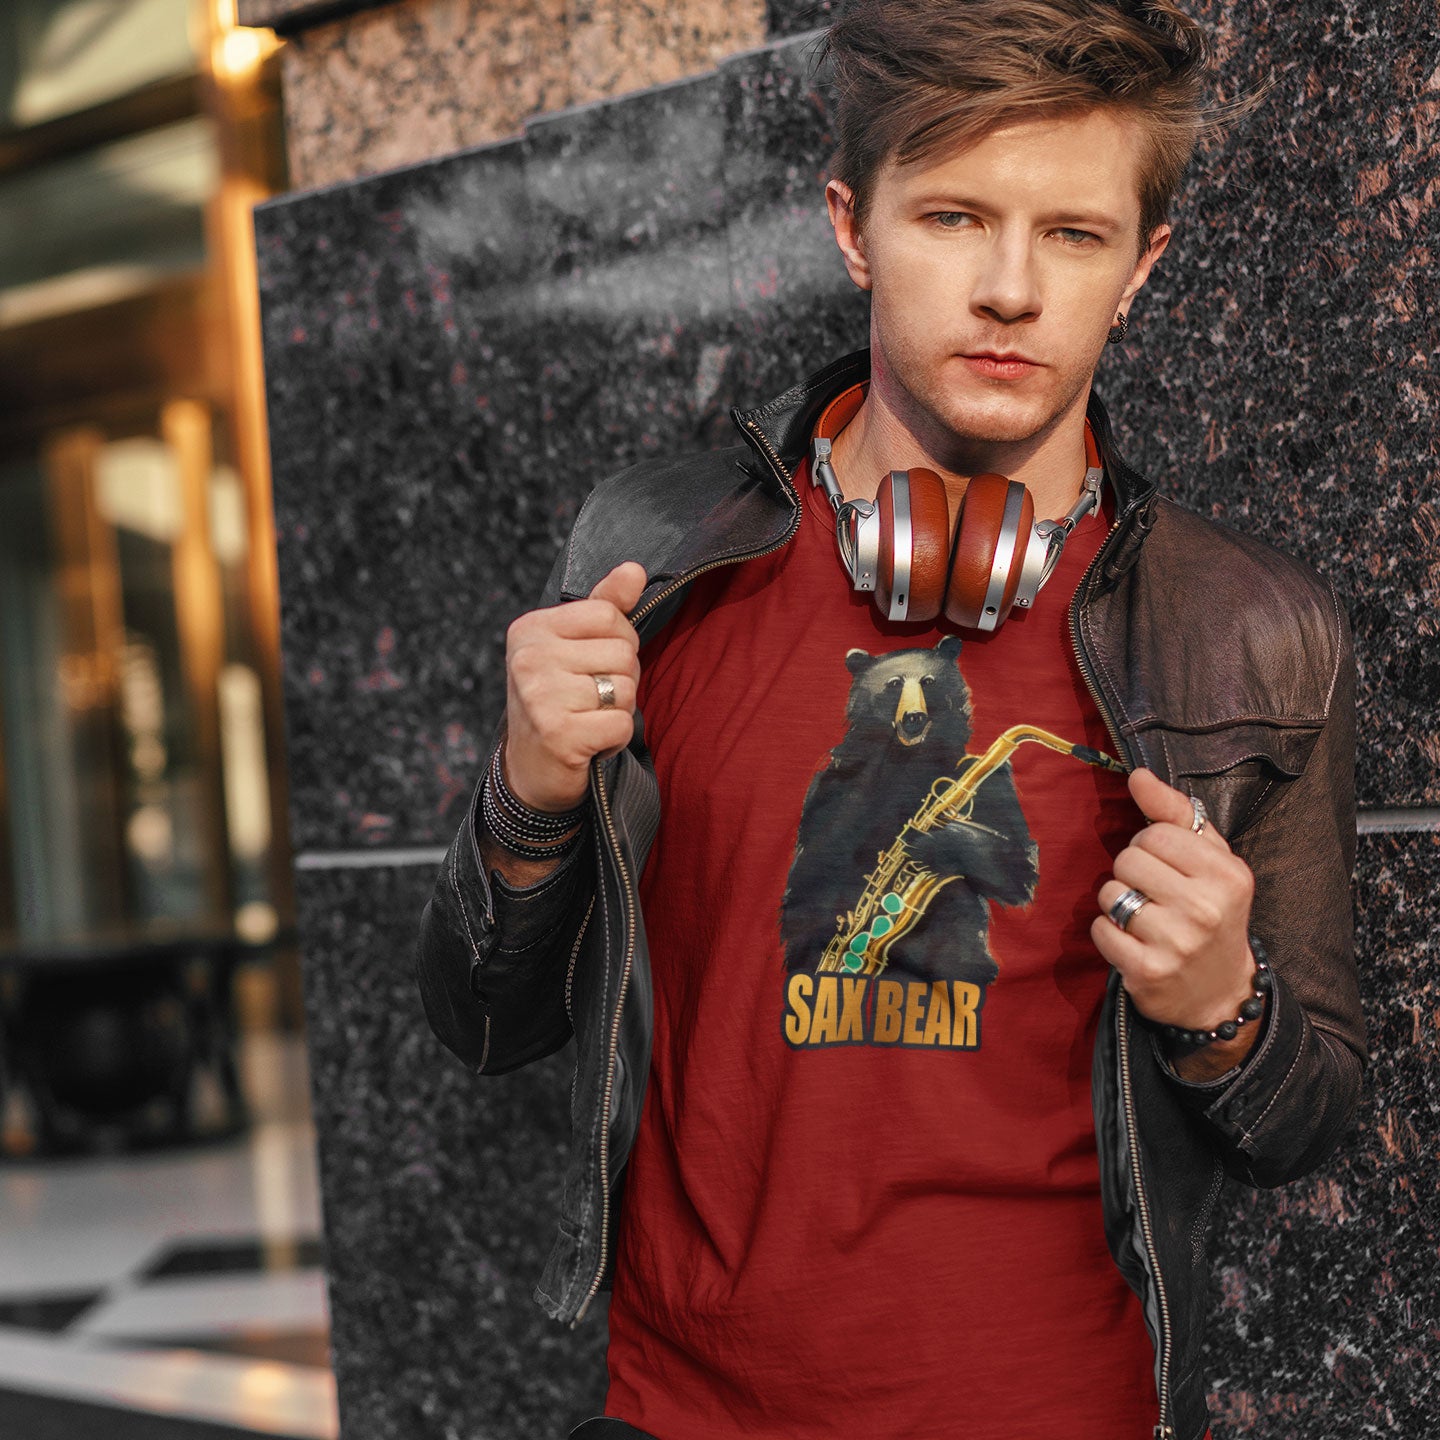 Young guy wearing headphones and a red t-shirt with a print of a bear holding a saxophone with the caption Sax Bear